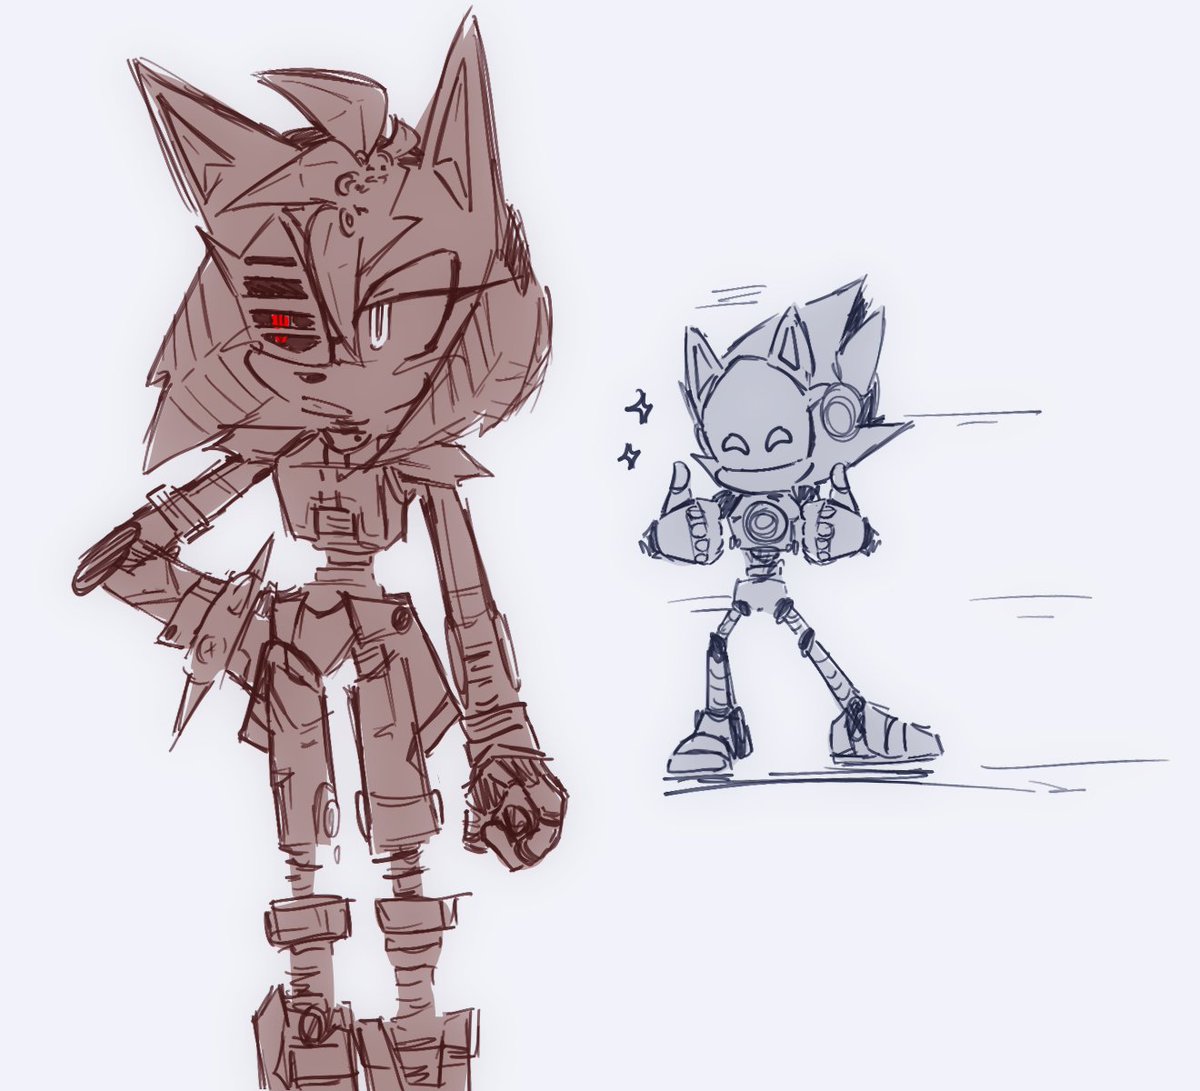 He's supportive #SonicPrime #rustyrose #MetalSonic #SonicTheHedgehog